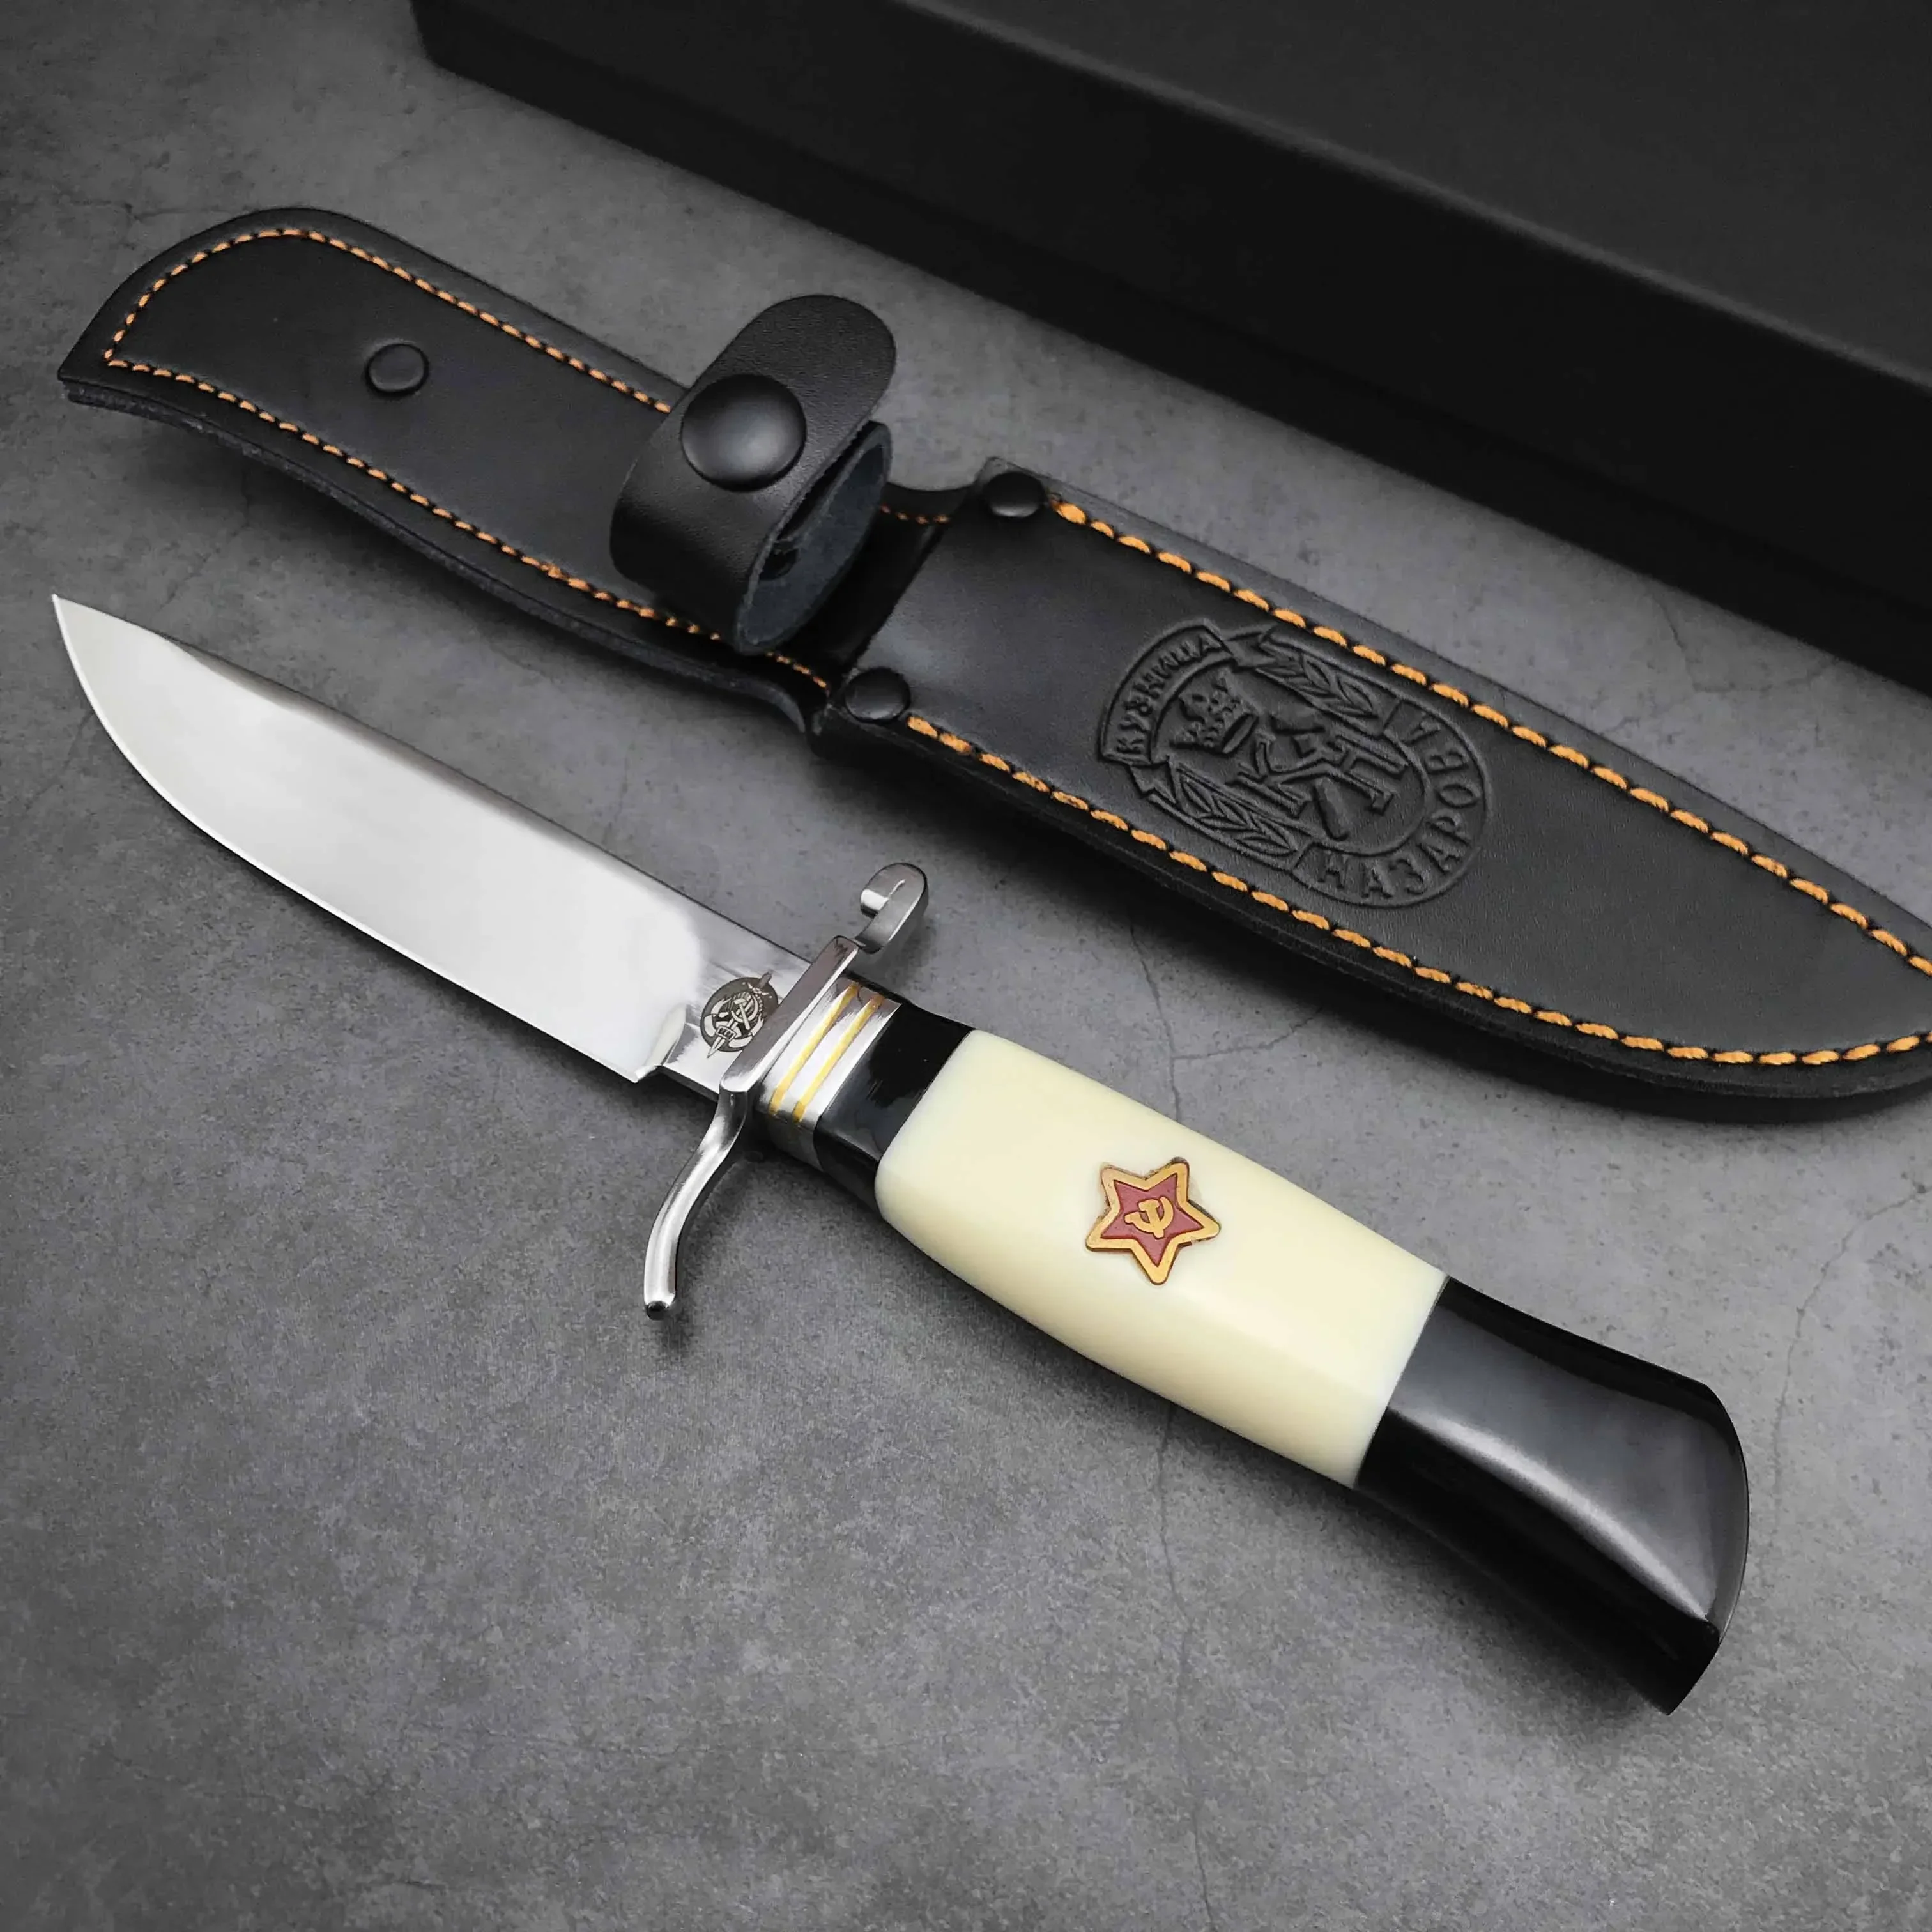 

Russian Finka NKVD KGB Wit Fixed Blade Knife With Leather Sheath 440C Blade Resin Handle Survival Hunting Outdoor Multi-Tools